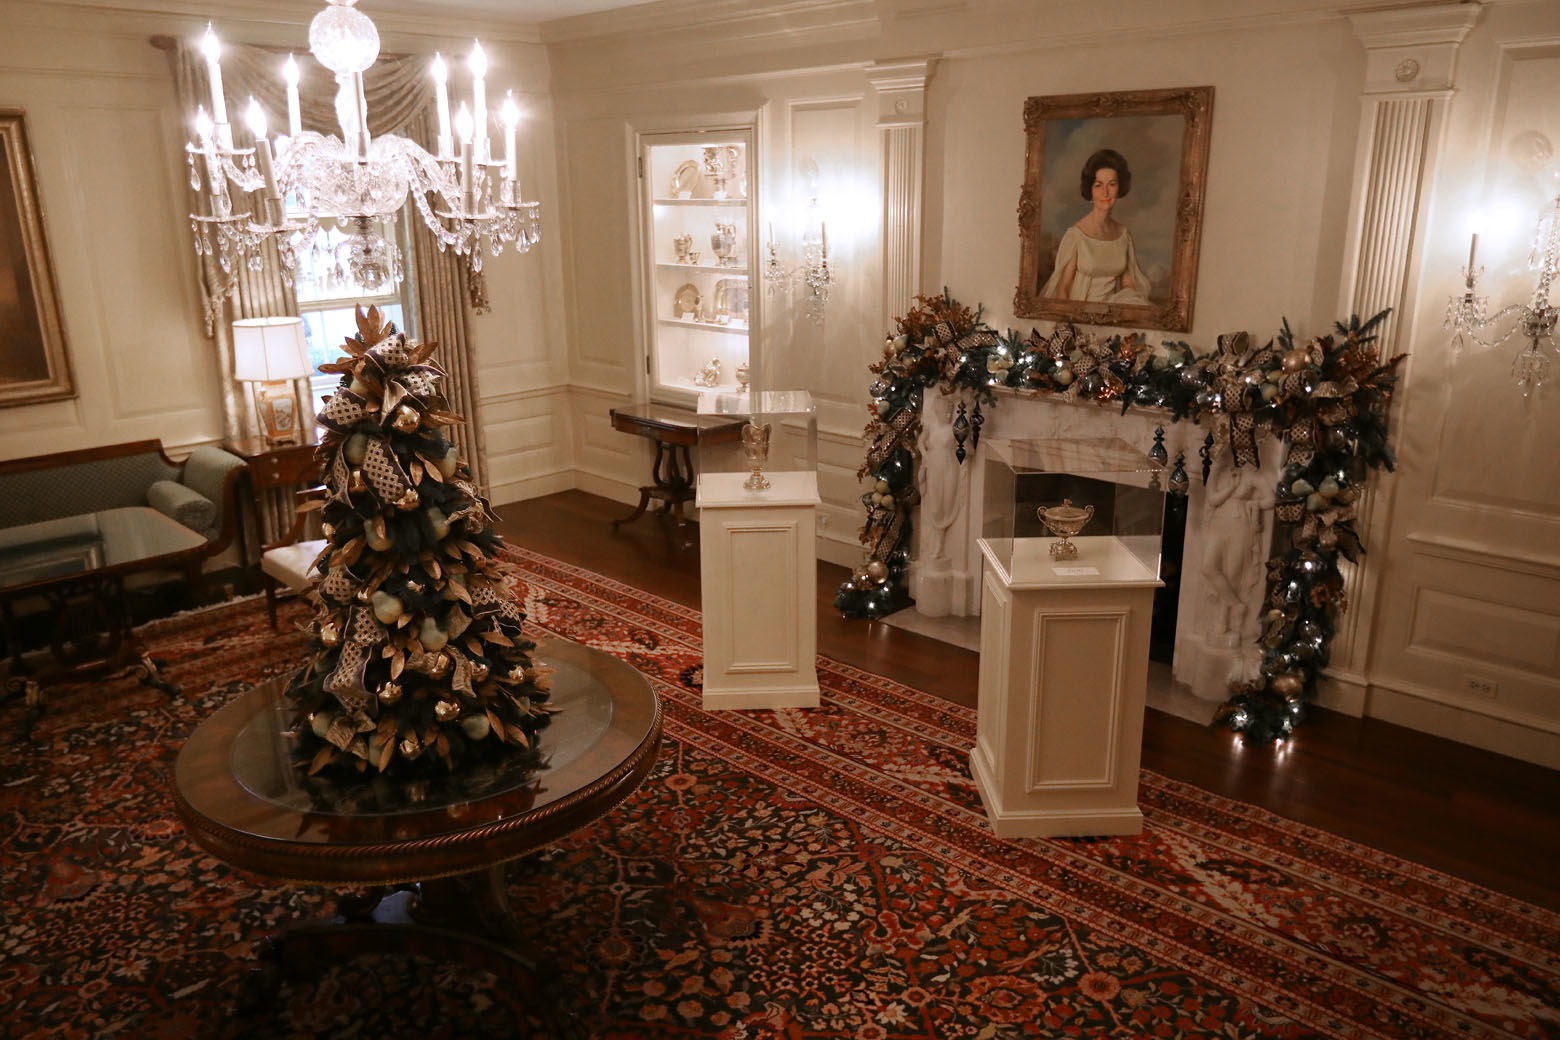 WASHINGTON, DC - NOVEMBER 26: The Vermeil Room is decorated for the holidays at the White House November 26, 2018 in Washington, DC. The 2018 theme of the White House holiday decorations is 'American Treasures,' and features patriotic displays highlighting the country's 'unique heritage.' The White House expects to host 100 open houses and more than 30,000 guests who will tour the topiary trees, architectural models of major U.S. cities, the Gold Star family tree and national monuments in gingerbread. (Photo by Chip Somodevilla/Getty Images)